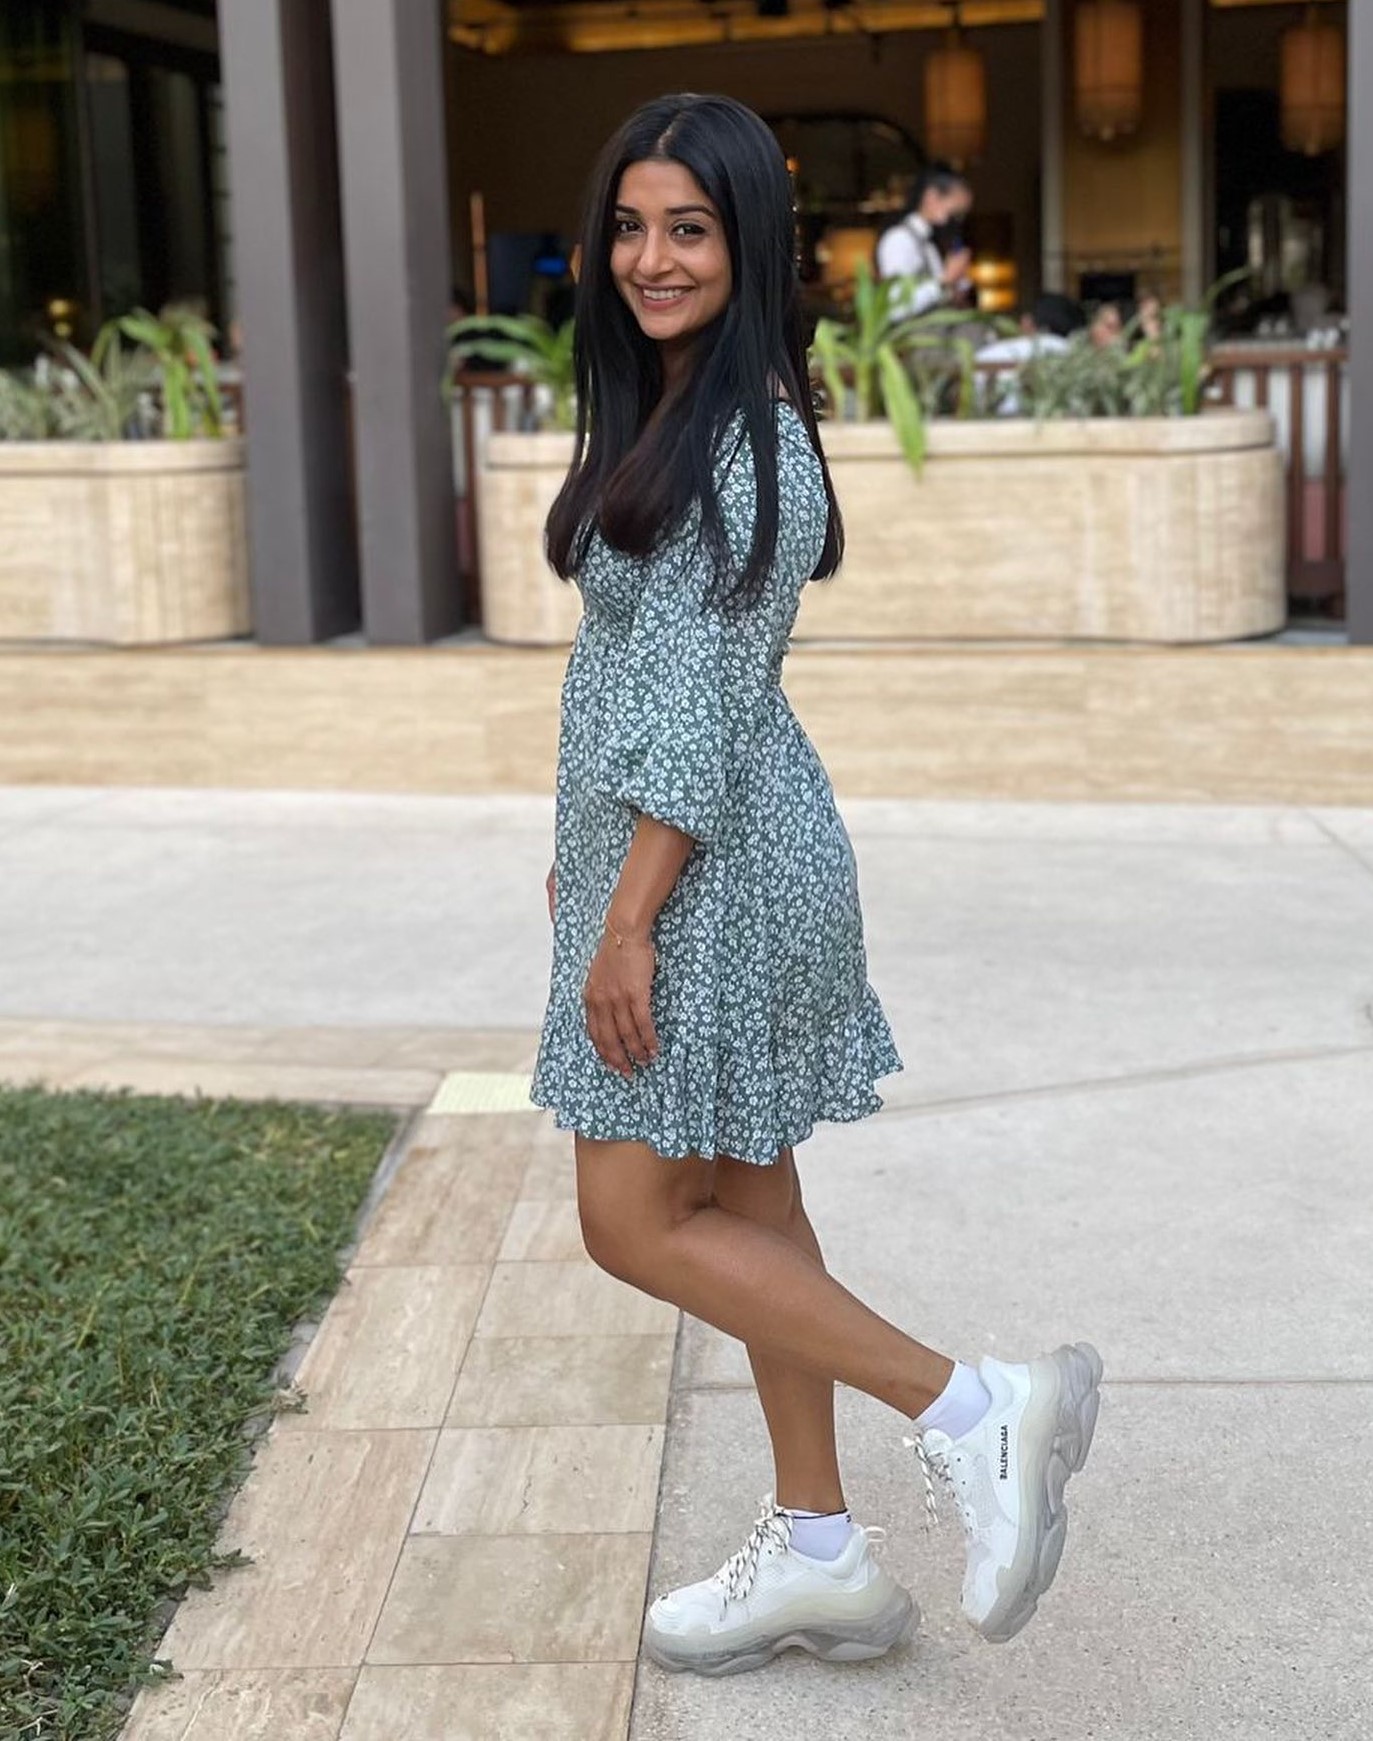 Meera Jasmine In Blue Floral Printed Short Dress With White Sneakers  Look Pretty & Vibrant